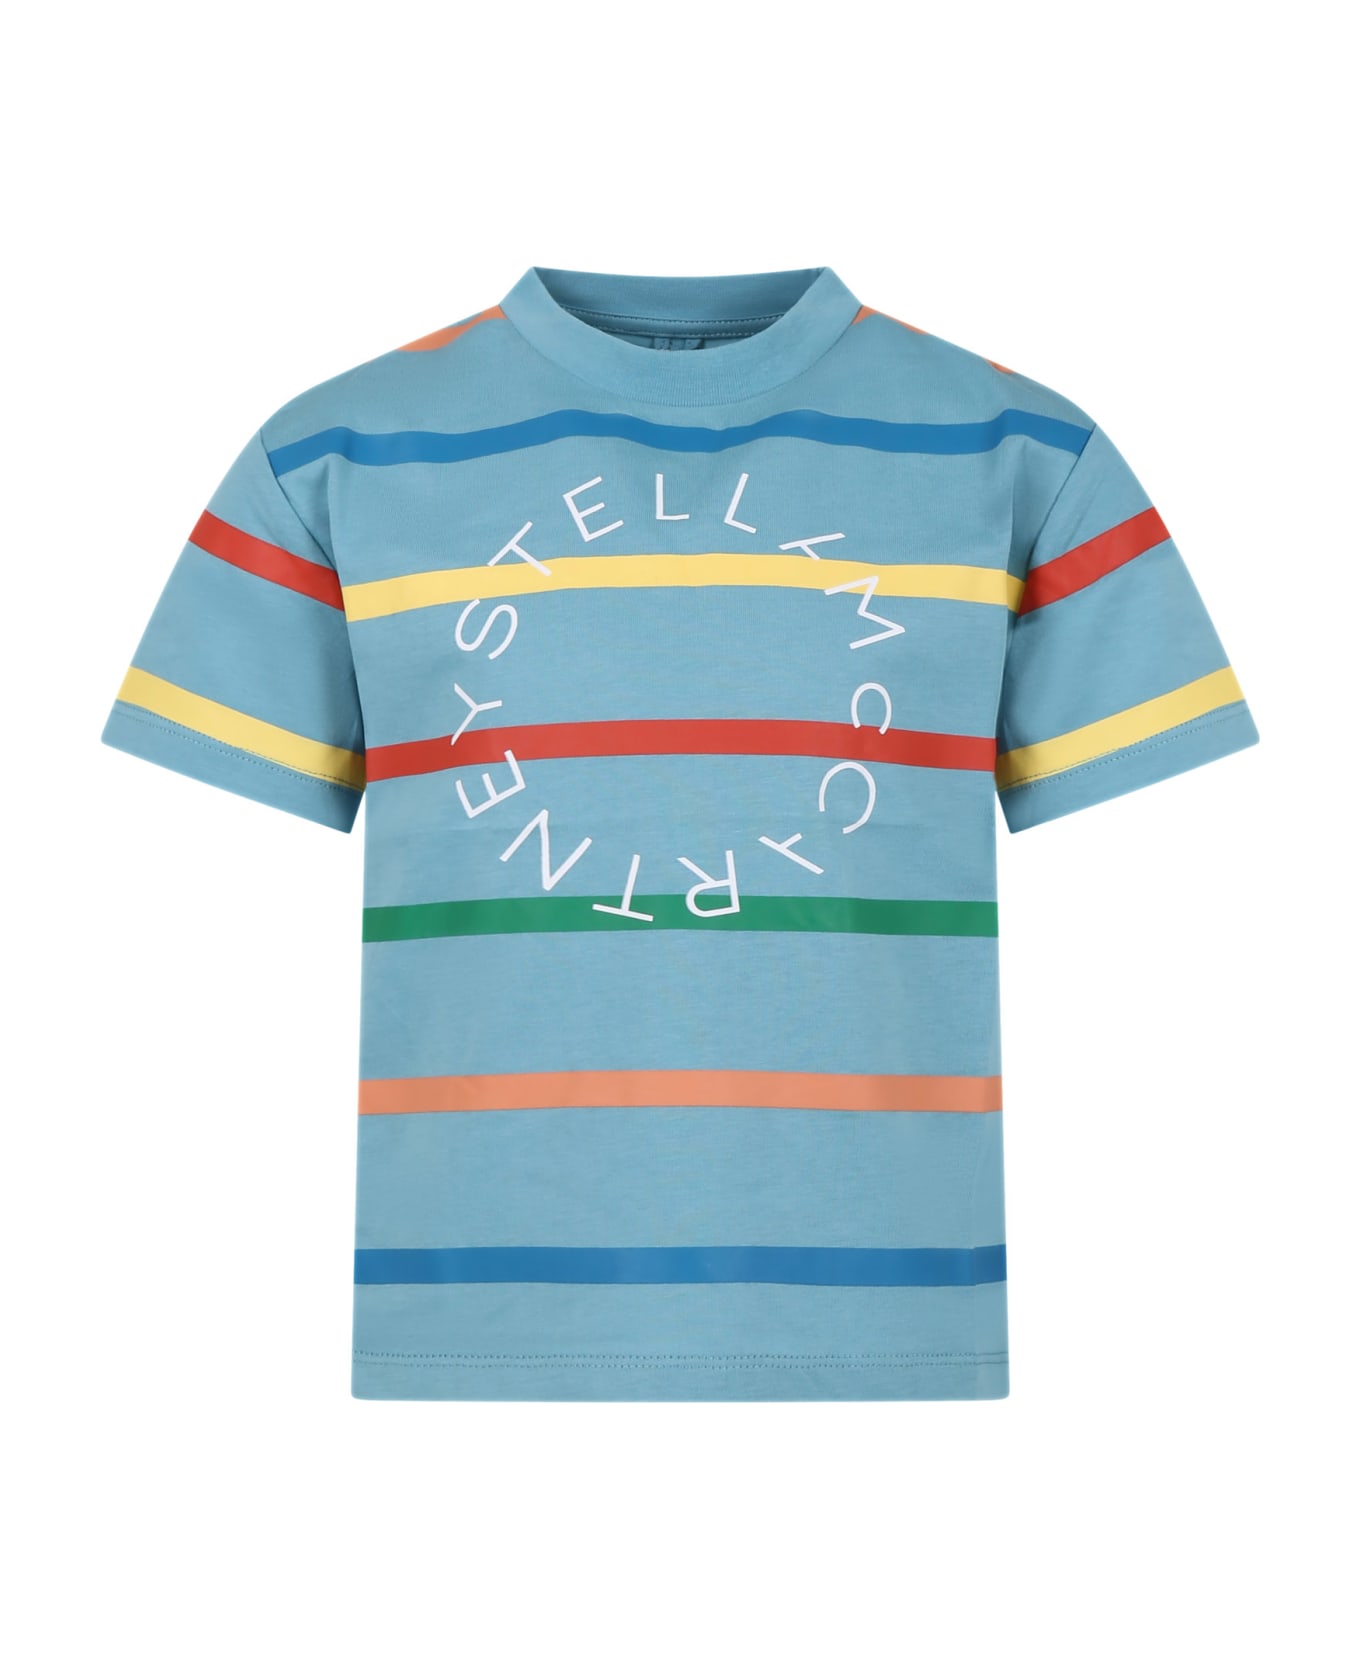 Stella McCartney Light Blue T-shirt For Kids With Logo And Multicolor Stripes - Multicolore